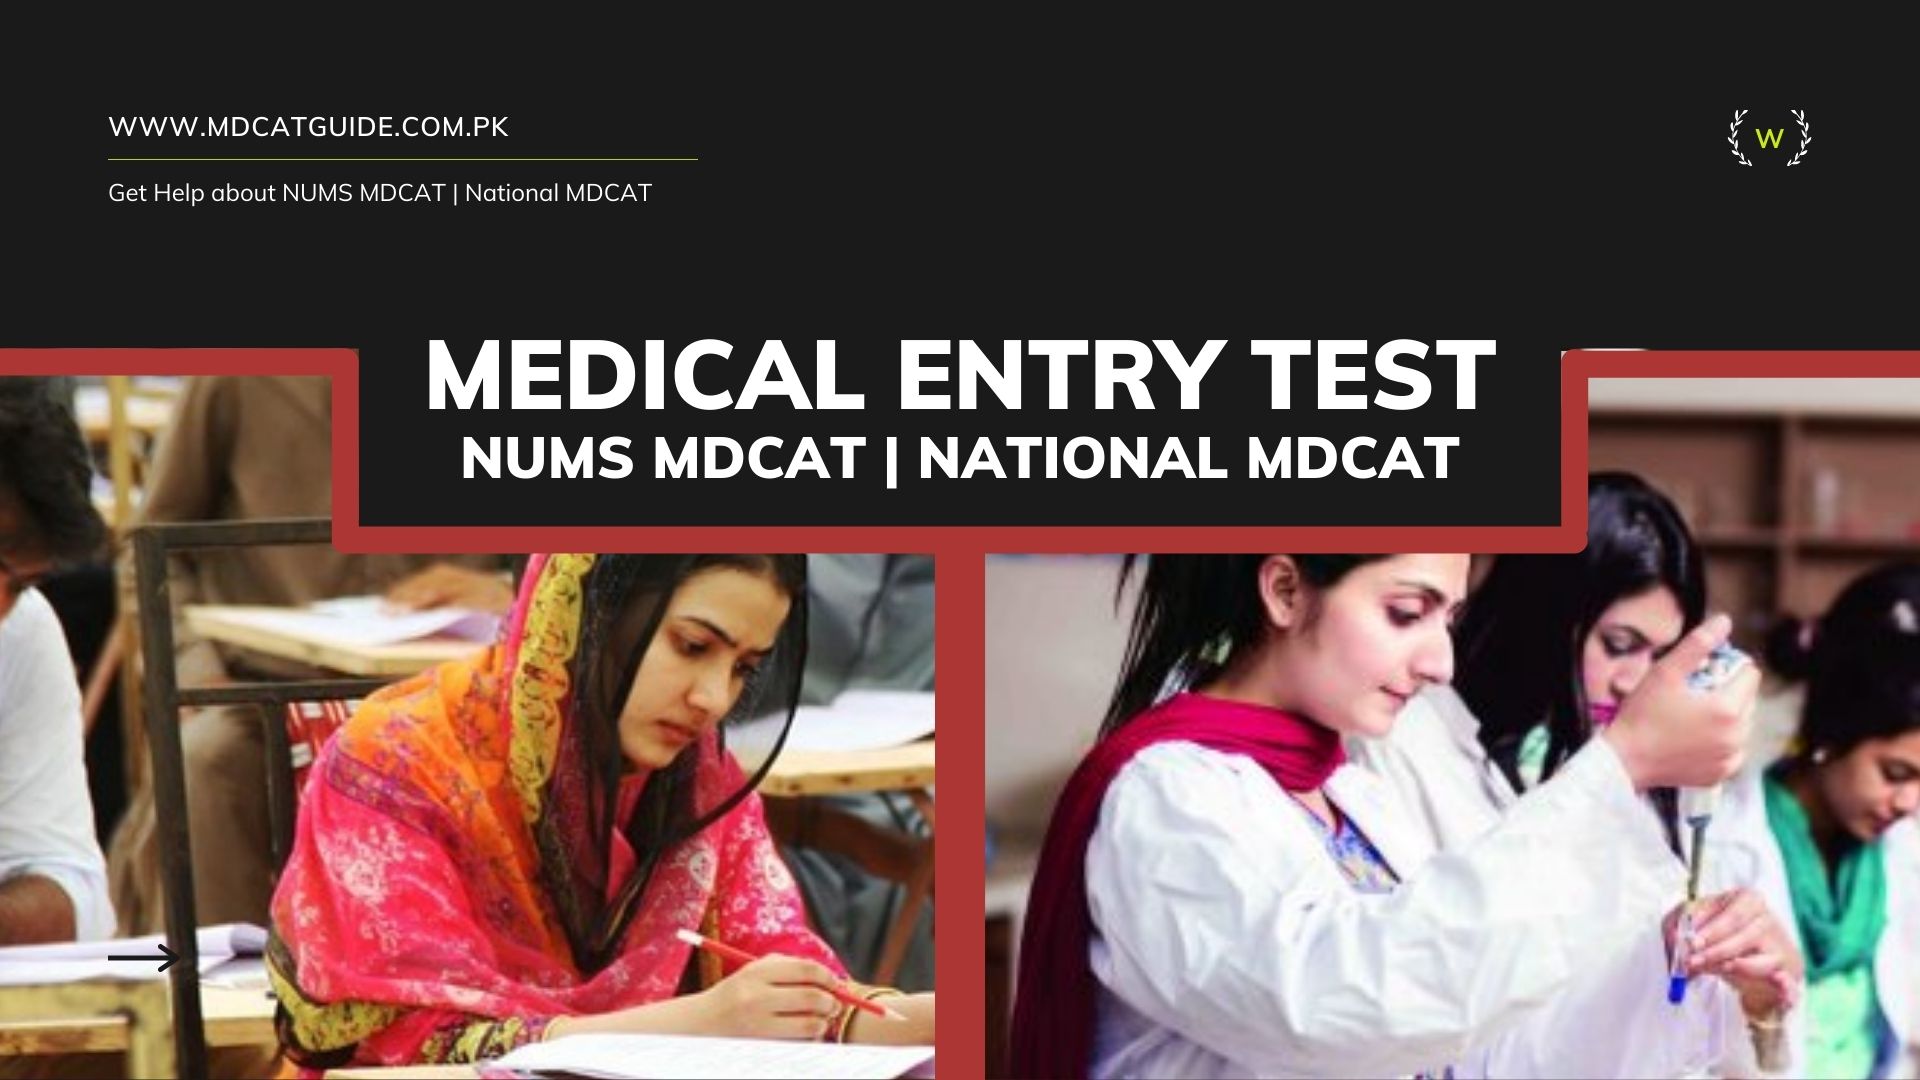 MDCAT Entry Test